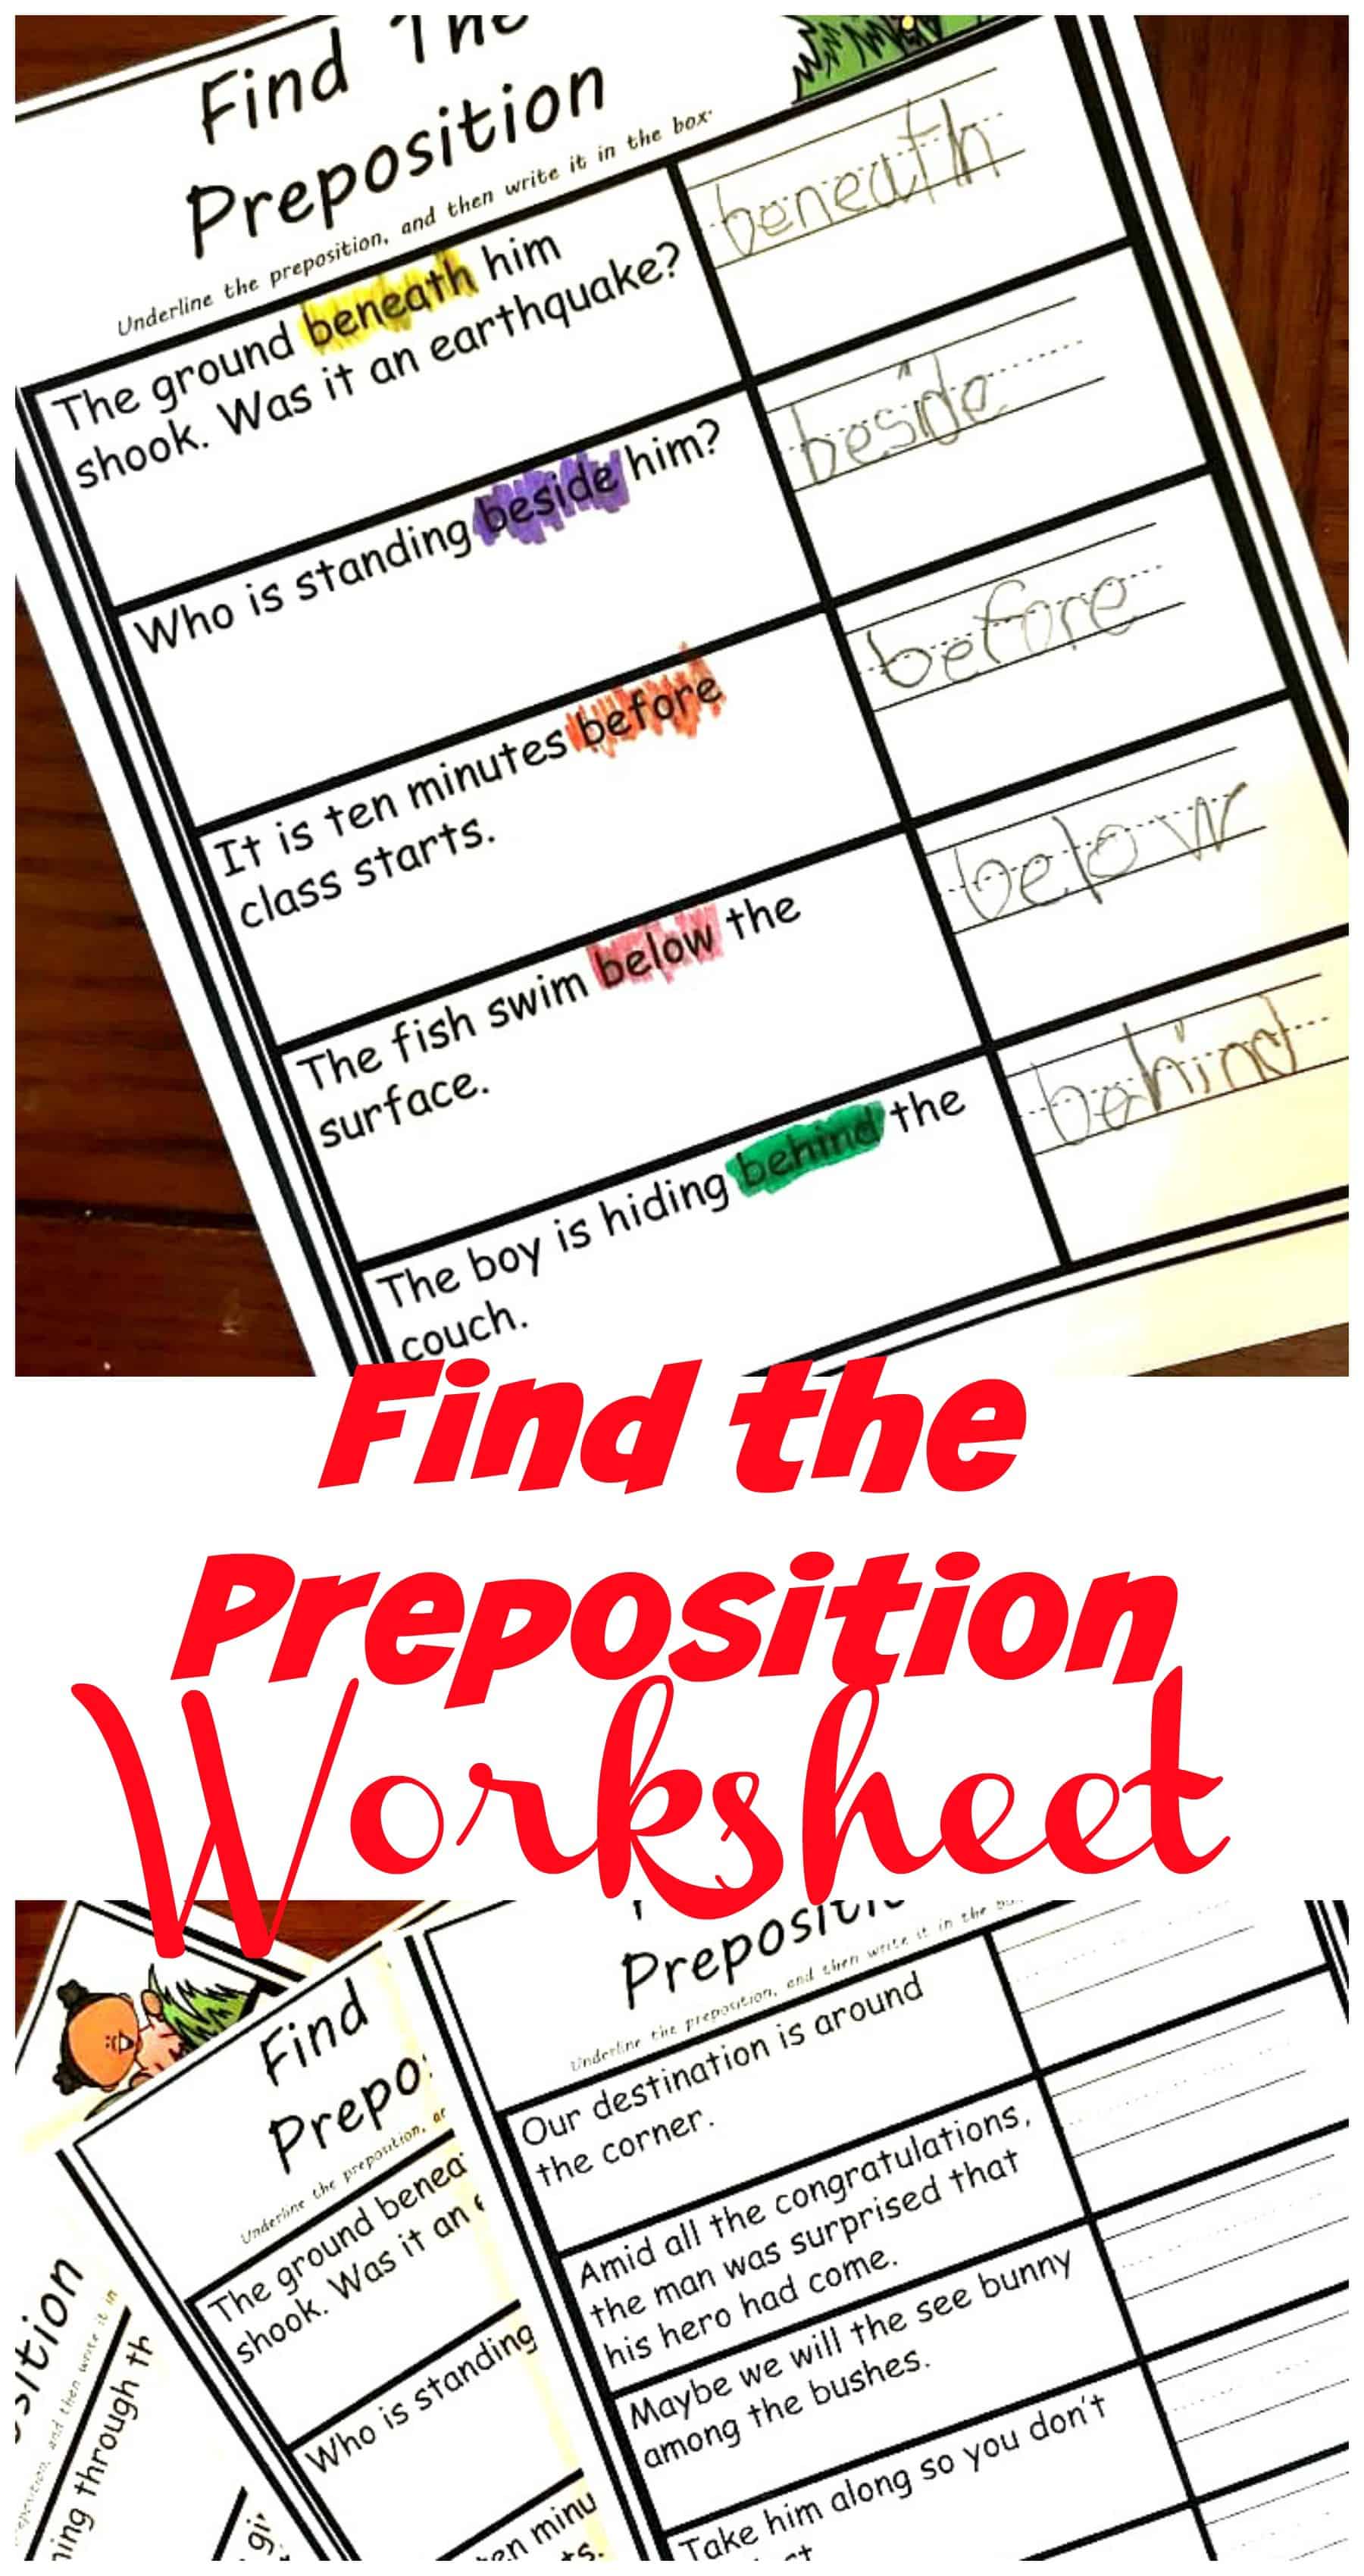 These simple preposition worksheets are very simple and easy to use. They are perfect for beginners who need a little practice finding prepositions in a sentence. 